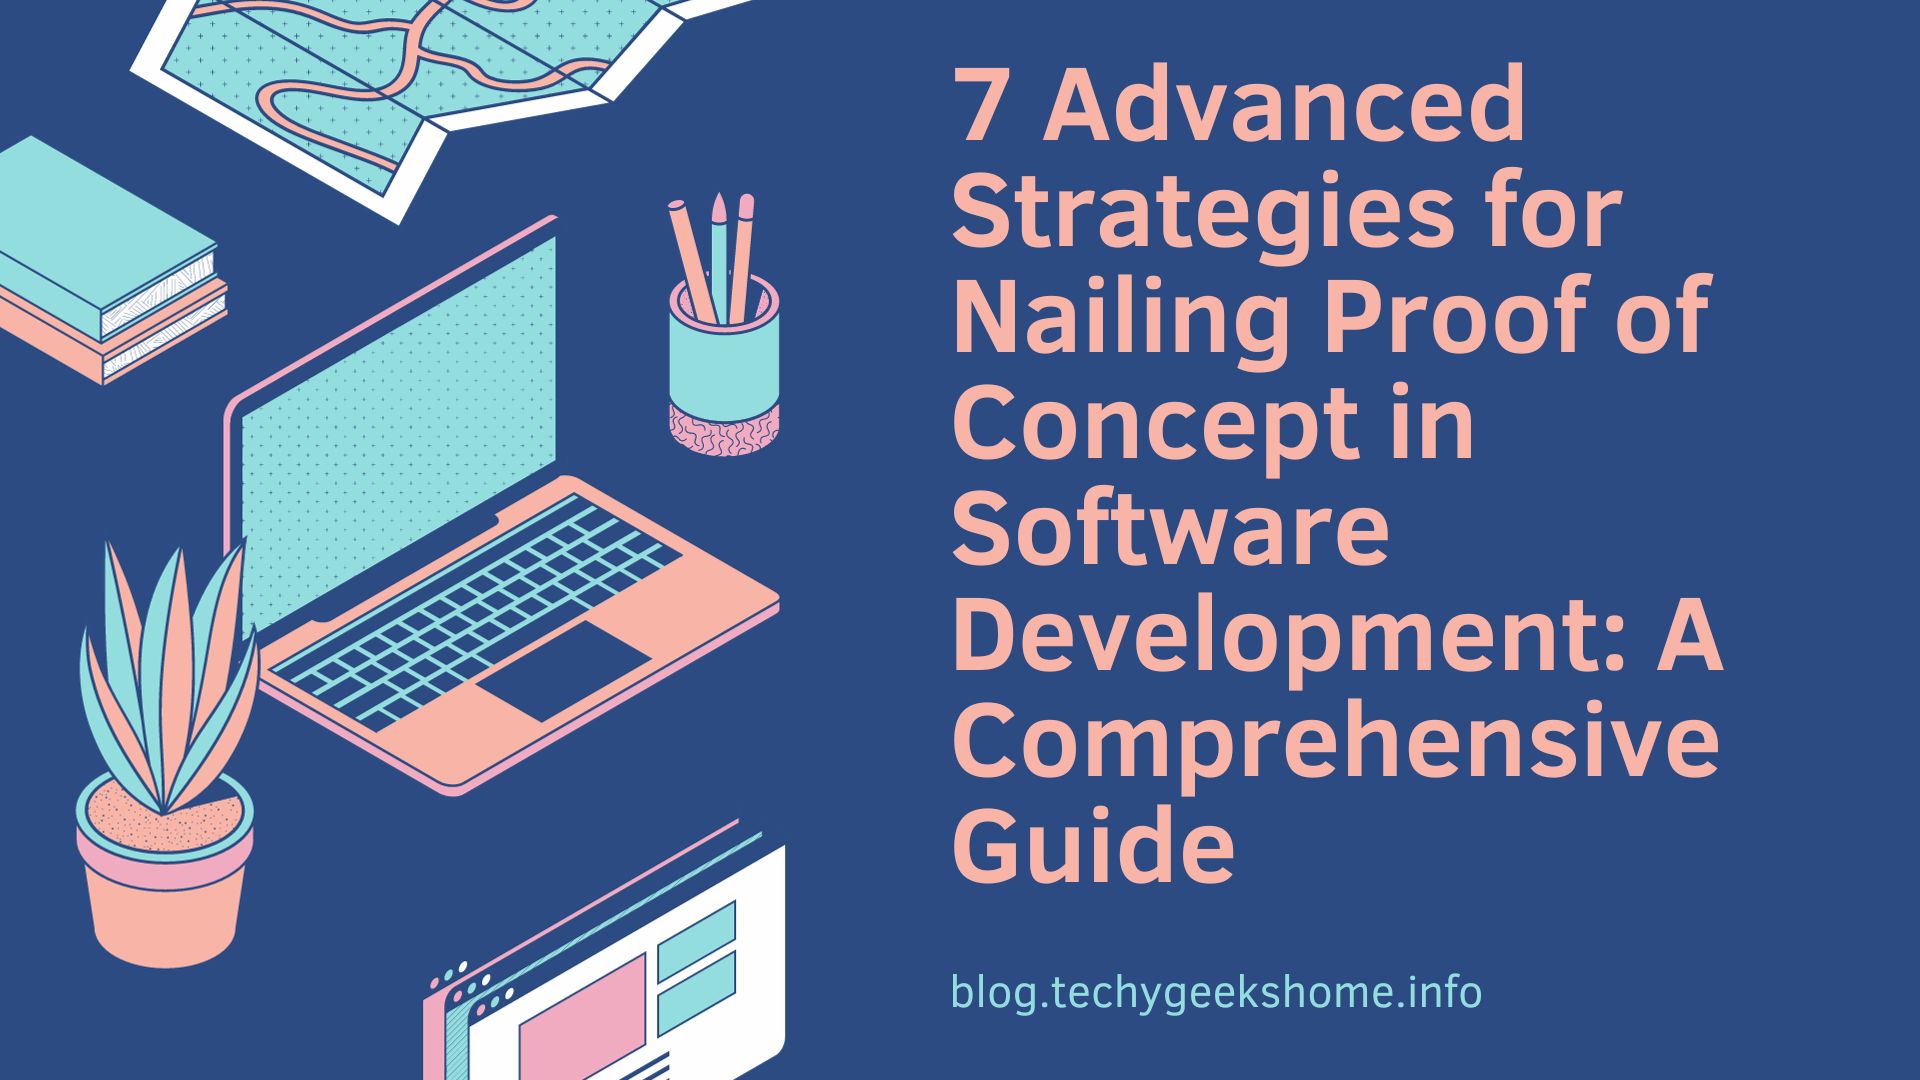 7 Advanced Strategies for Nailing Proof of Concept in Software Development: A Comprehensive Guide